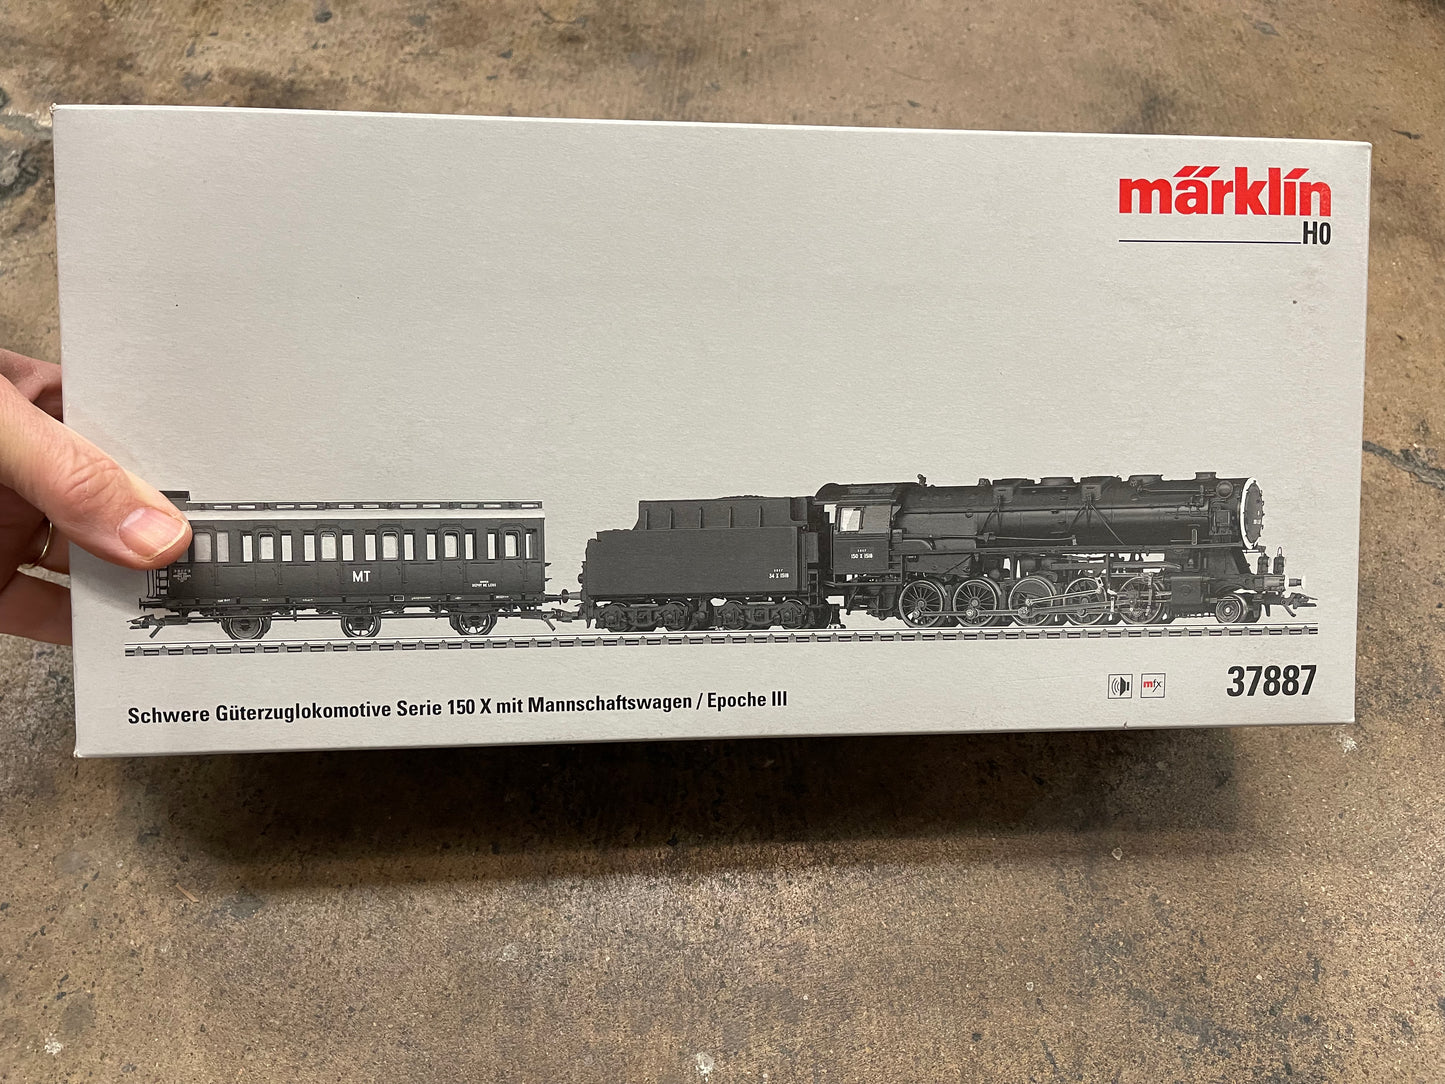 Marklin 37887 - Locomotive with Tender and Crew Car Class 150